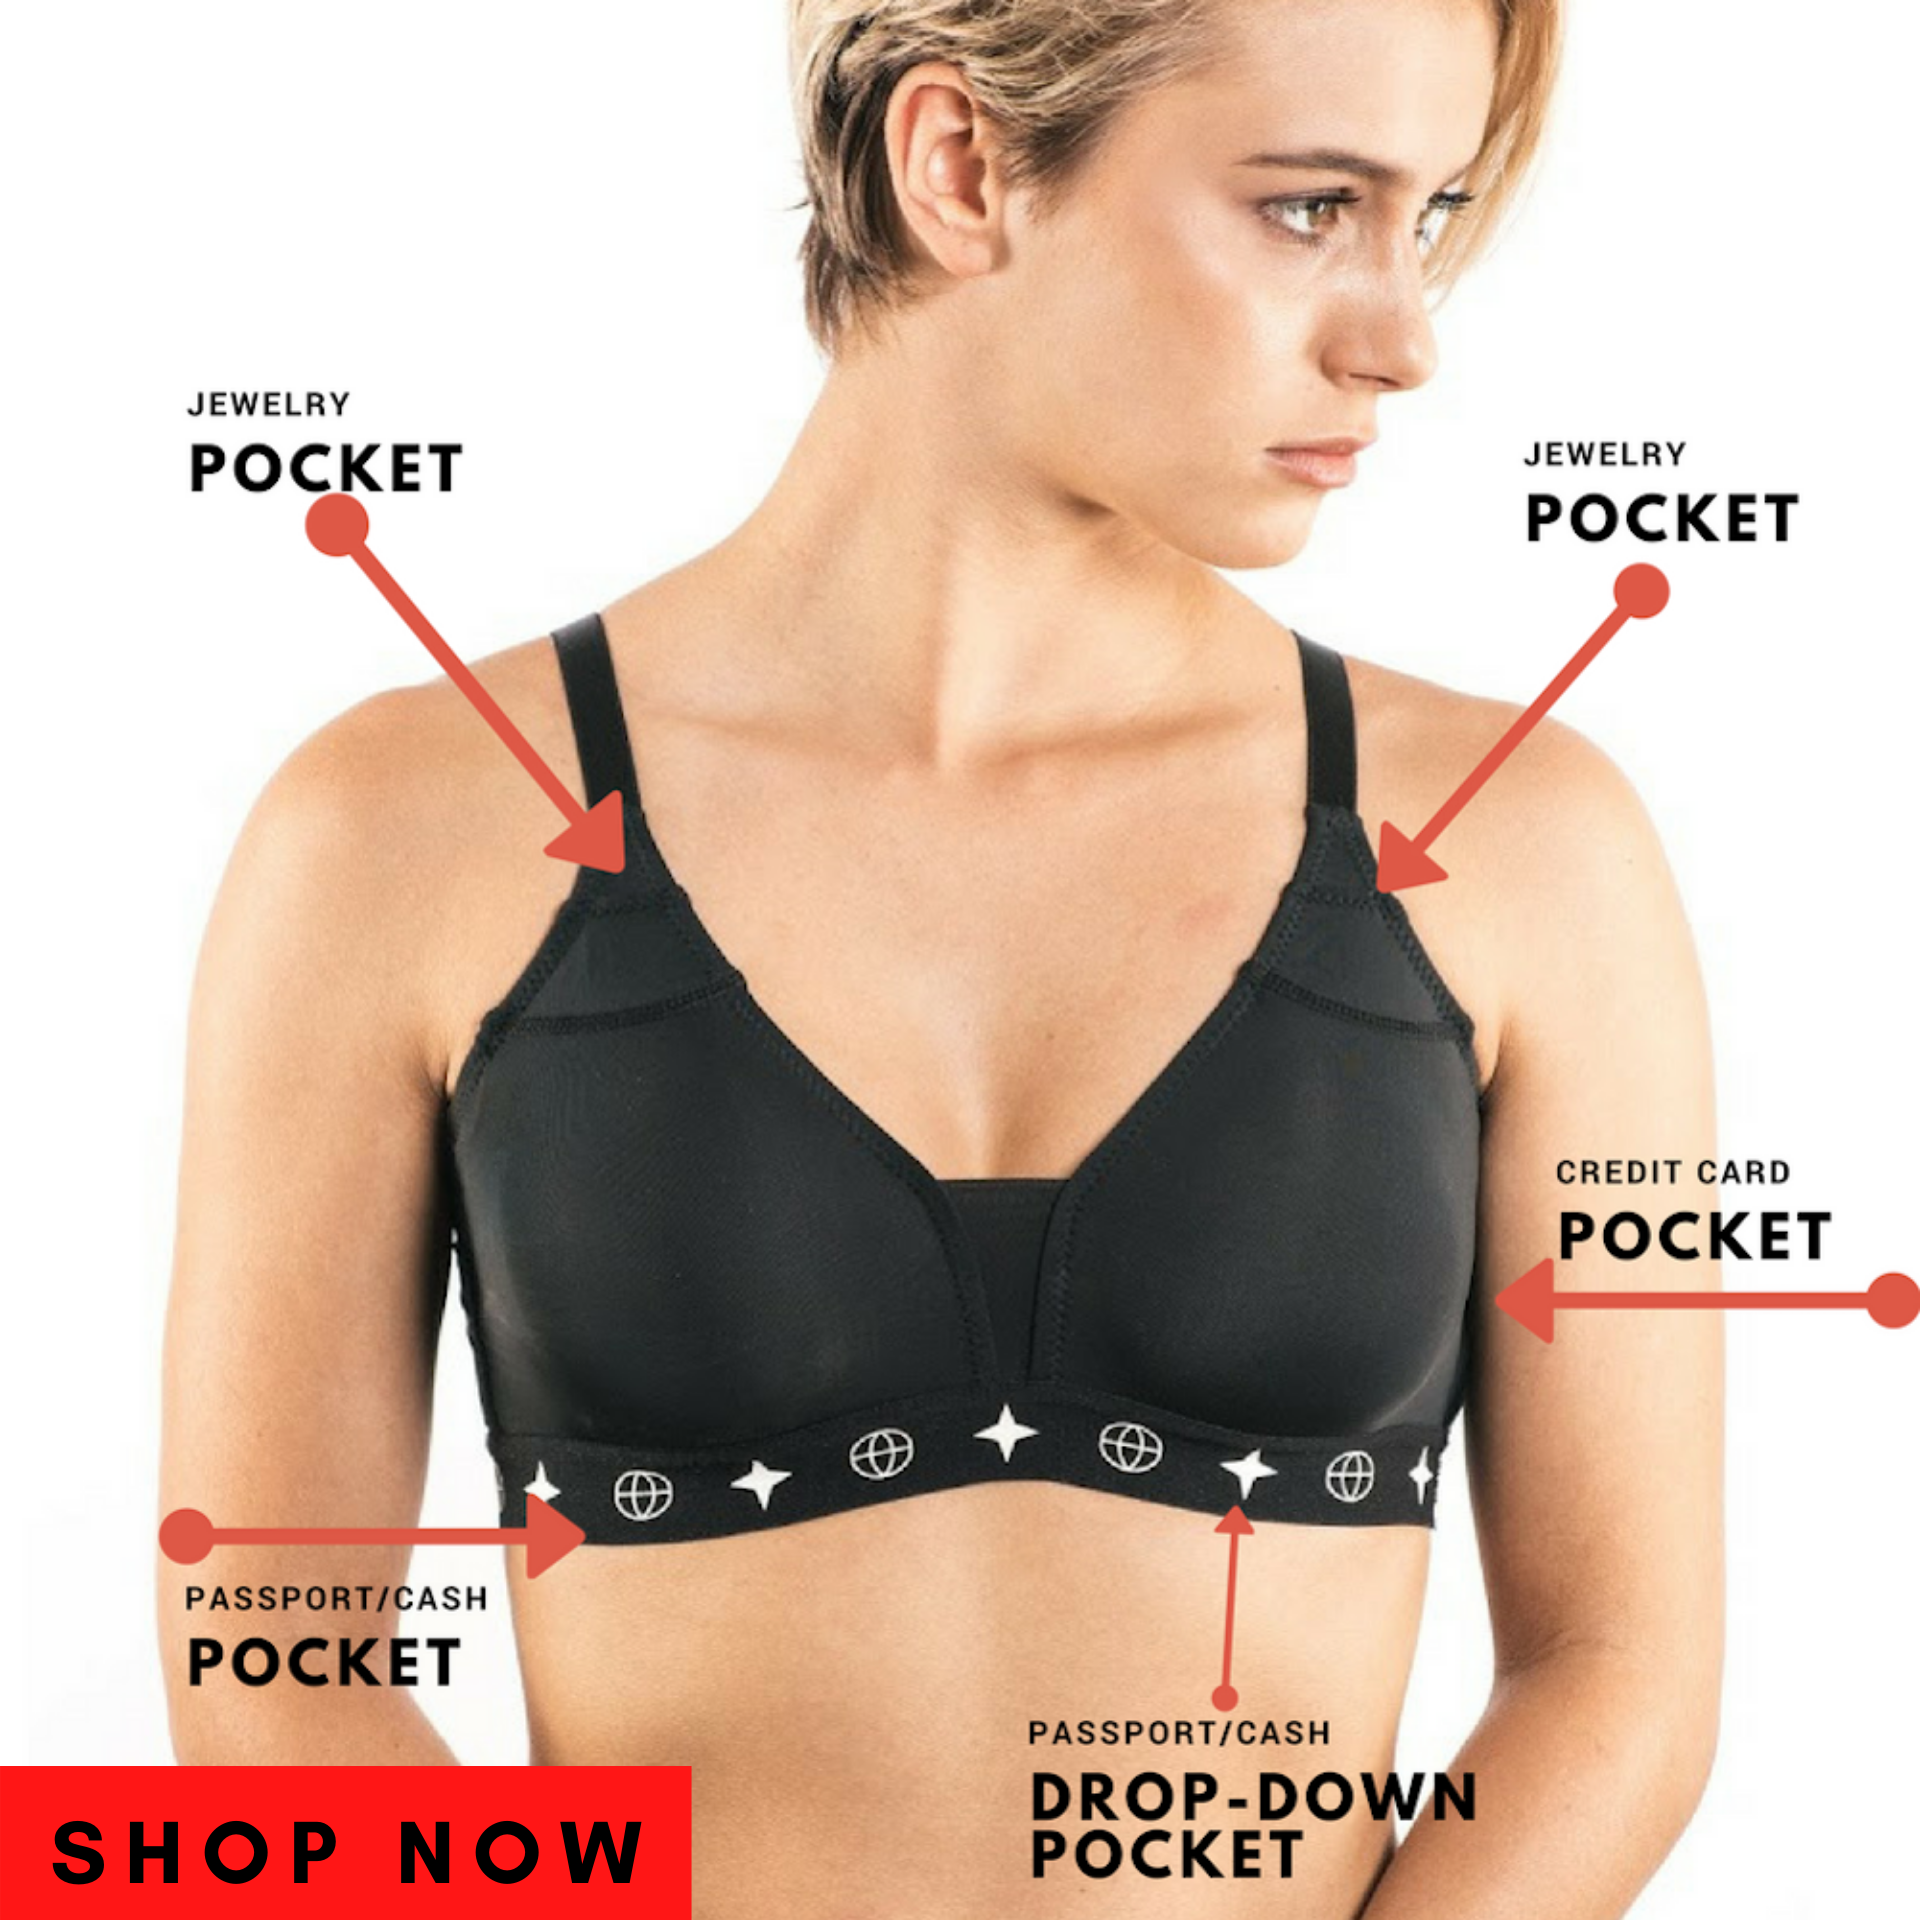 The Travel Bra: Giving female travellers a safe place to store